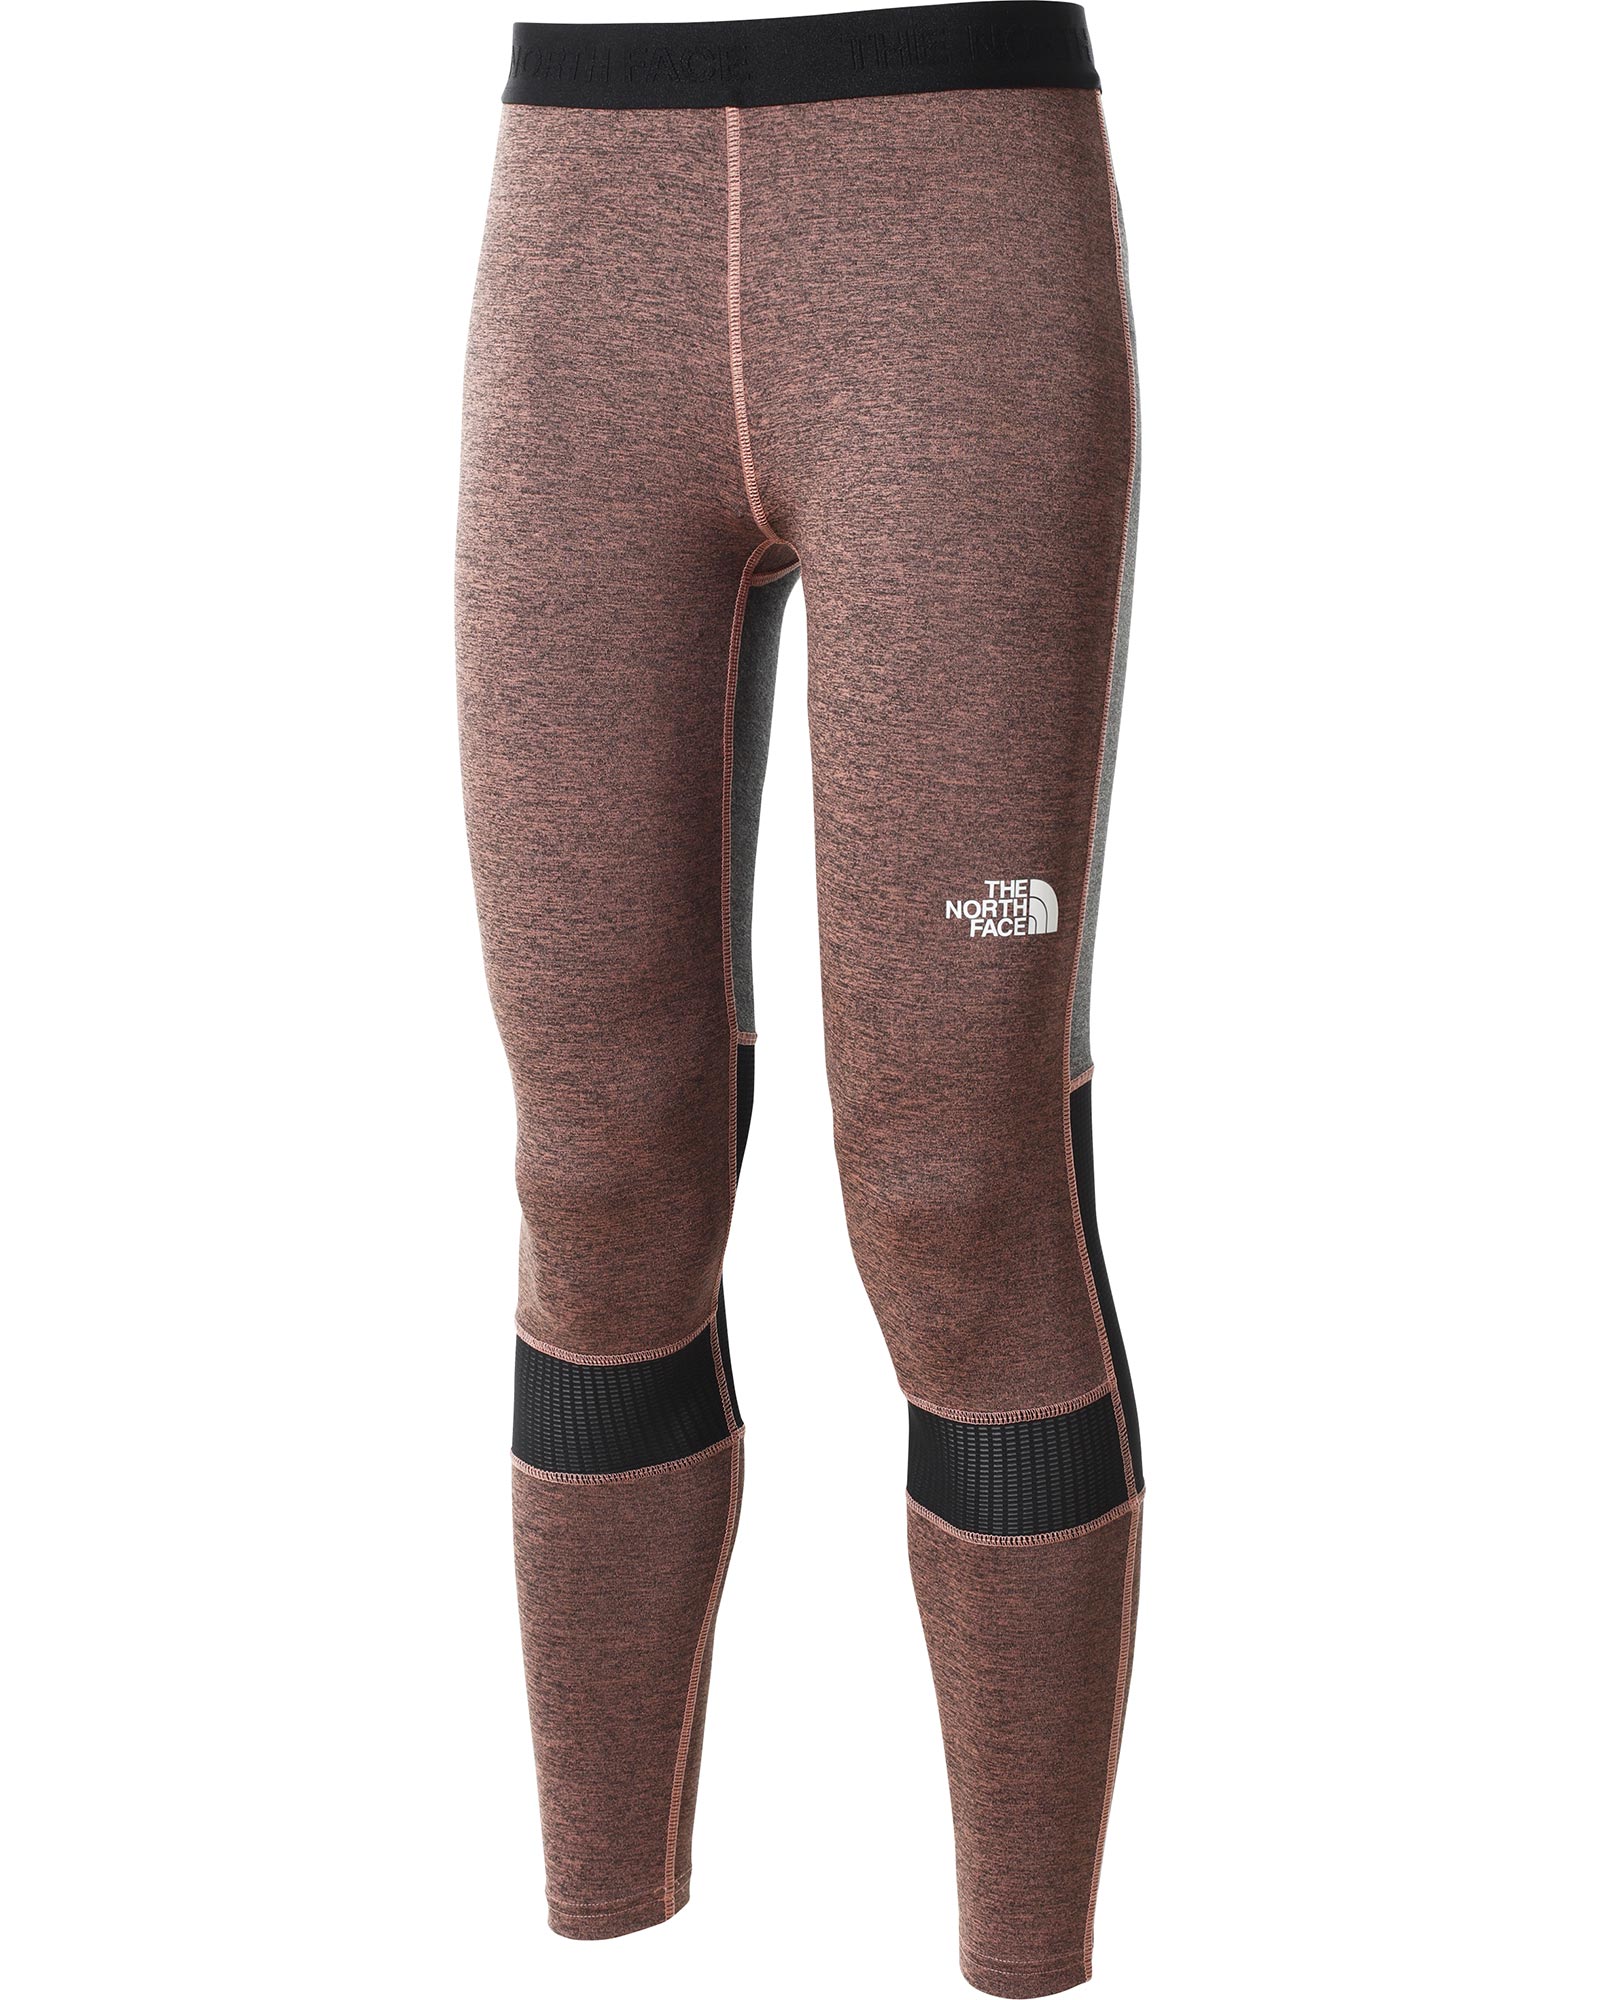 The North Face MA Women’s Tights - Rose Dawn Heather S